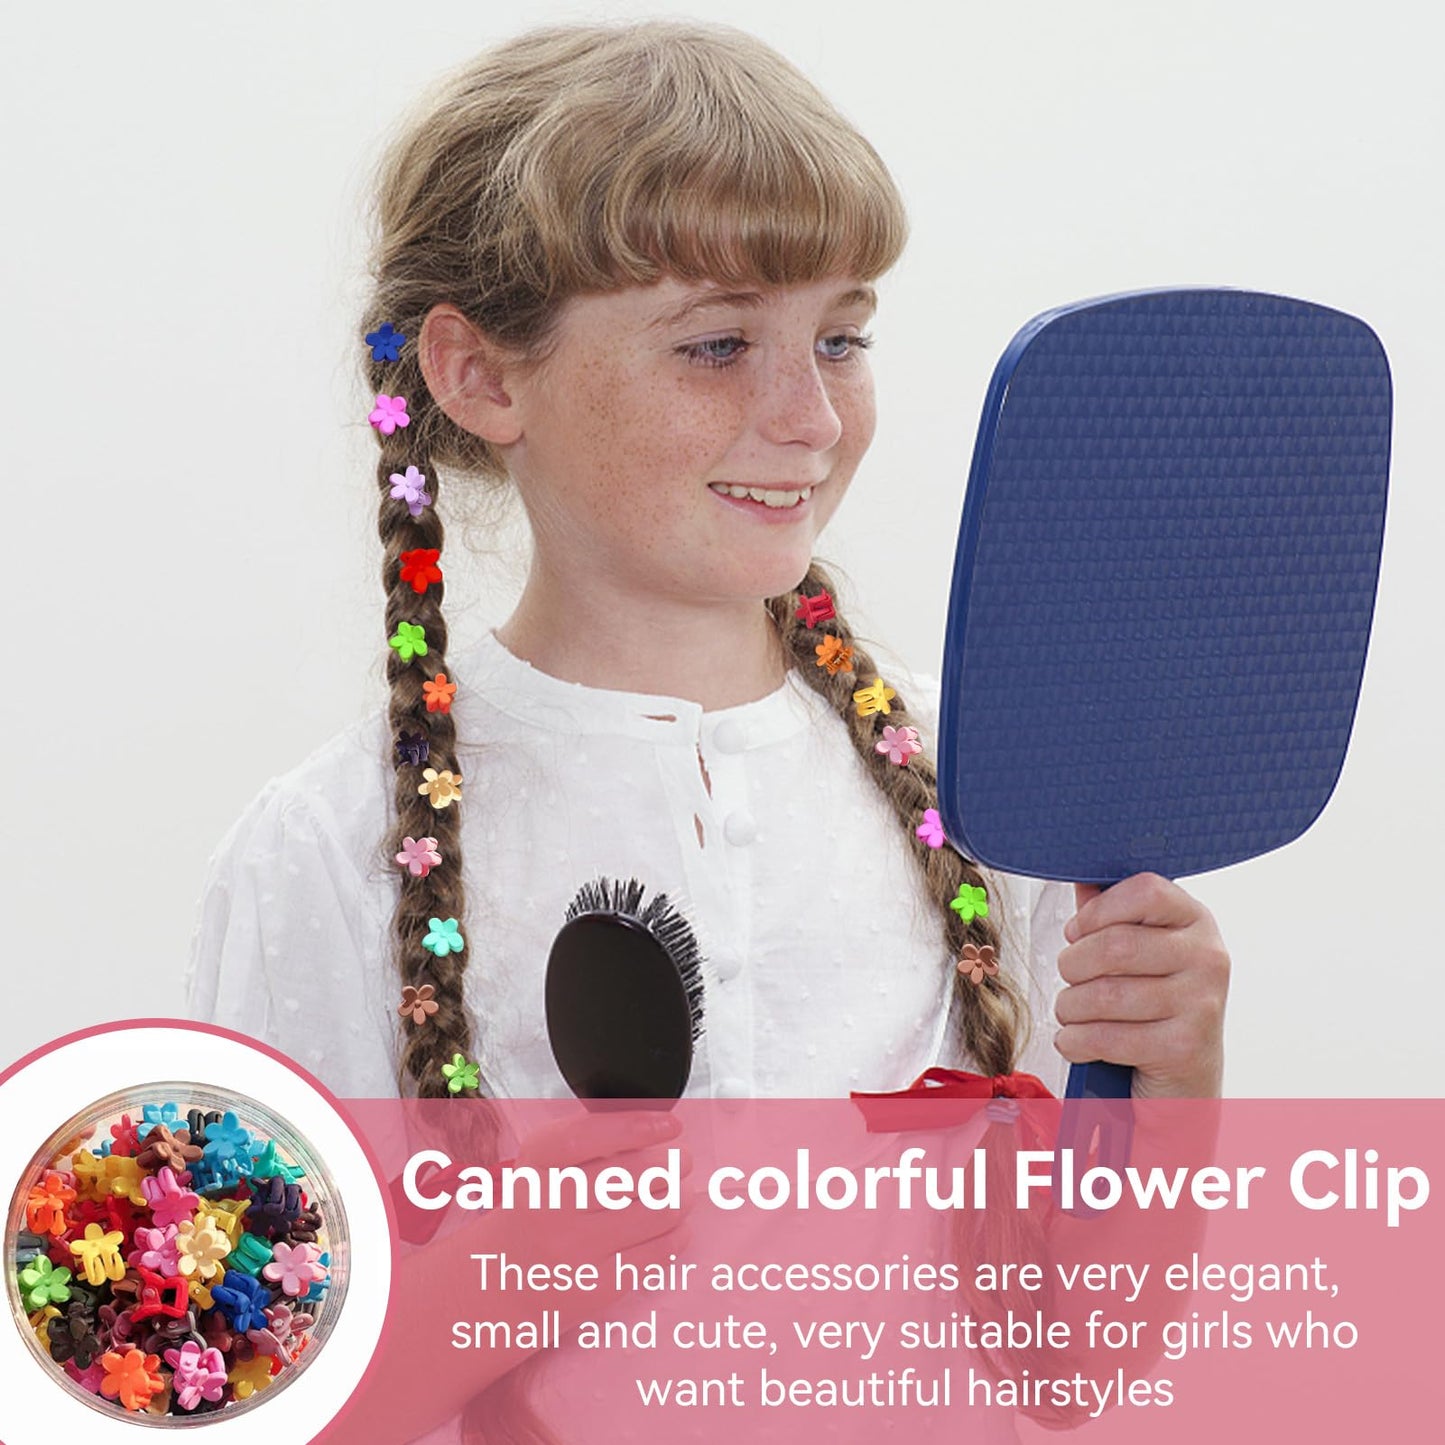 50pcs Mini Flower Claw Clip, Colorful Flower Cute Hair Clips Mini Claw Clips Bangs Clip Hair Styling Pin Hair Accessories with Can for Girls Women